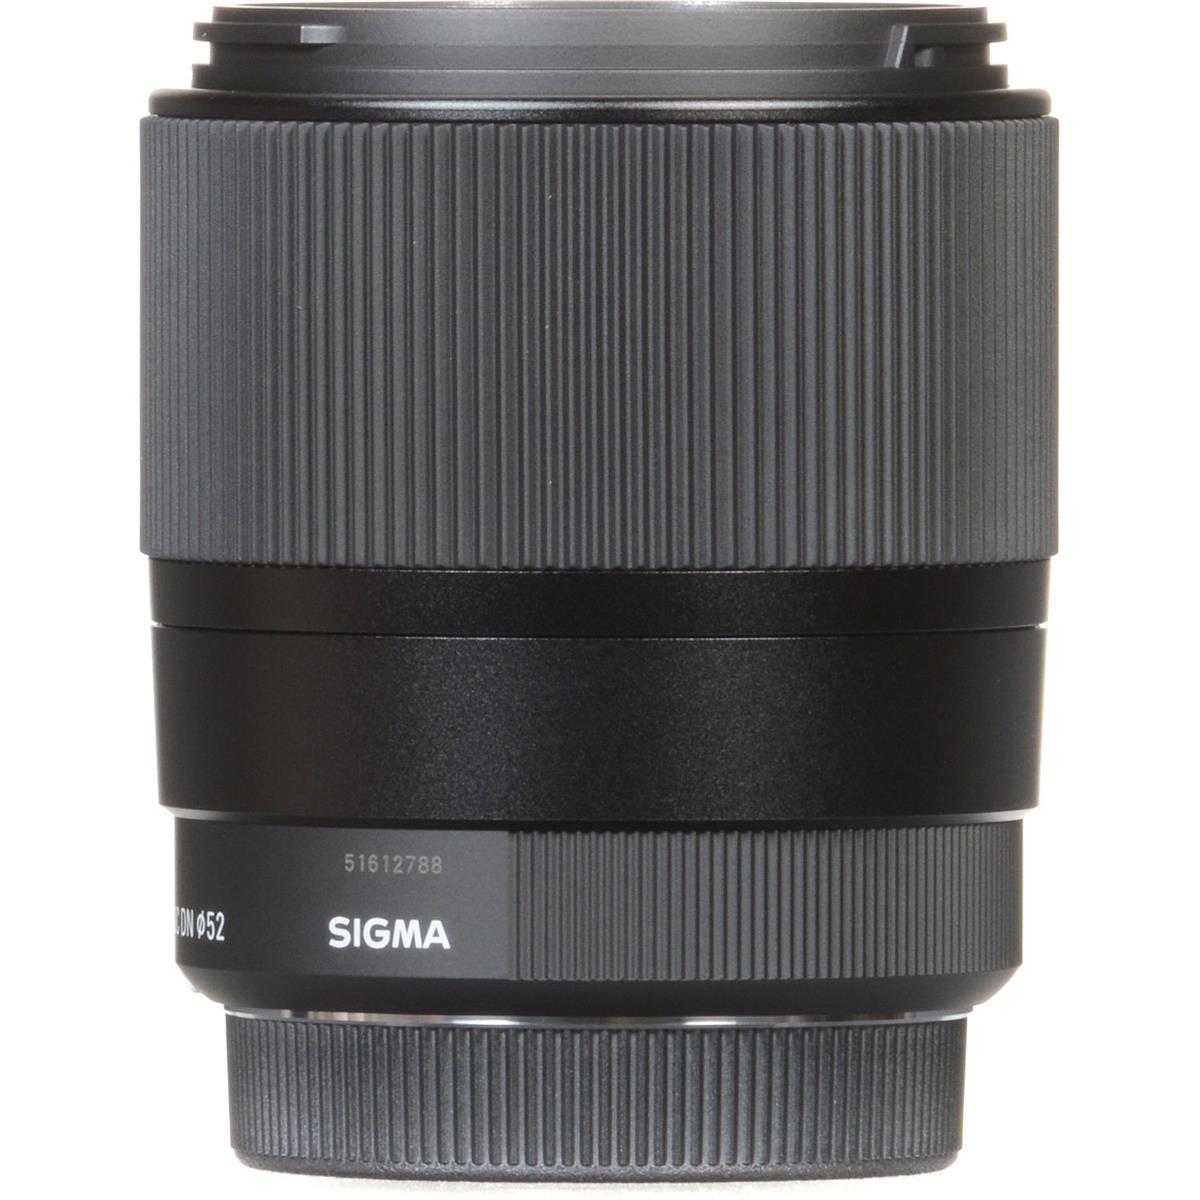 Sigma 30mm f1.4 DC DN Contemporary Lens for Micro 4/3